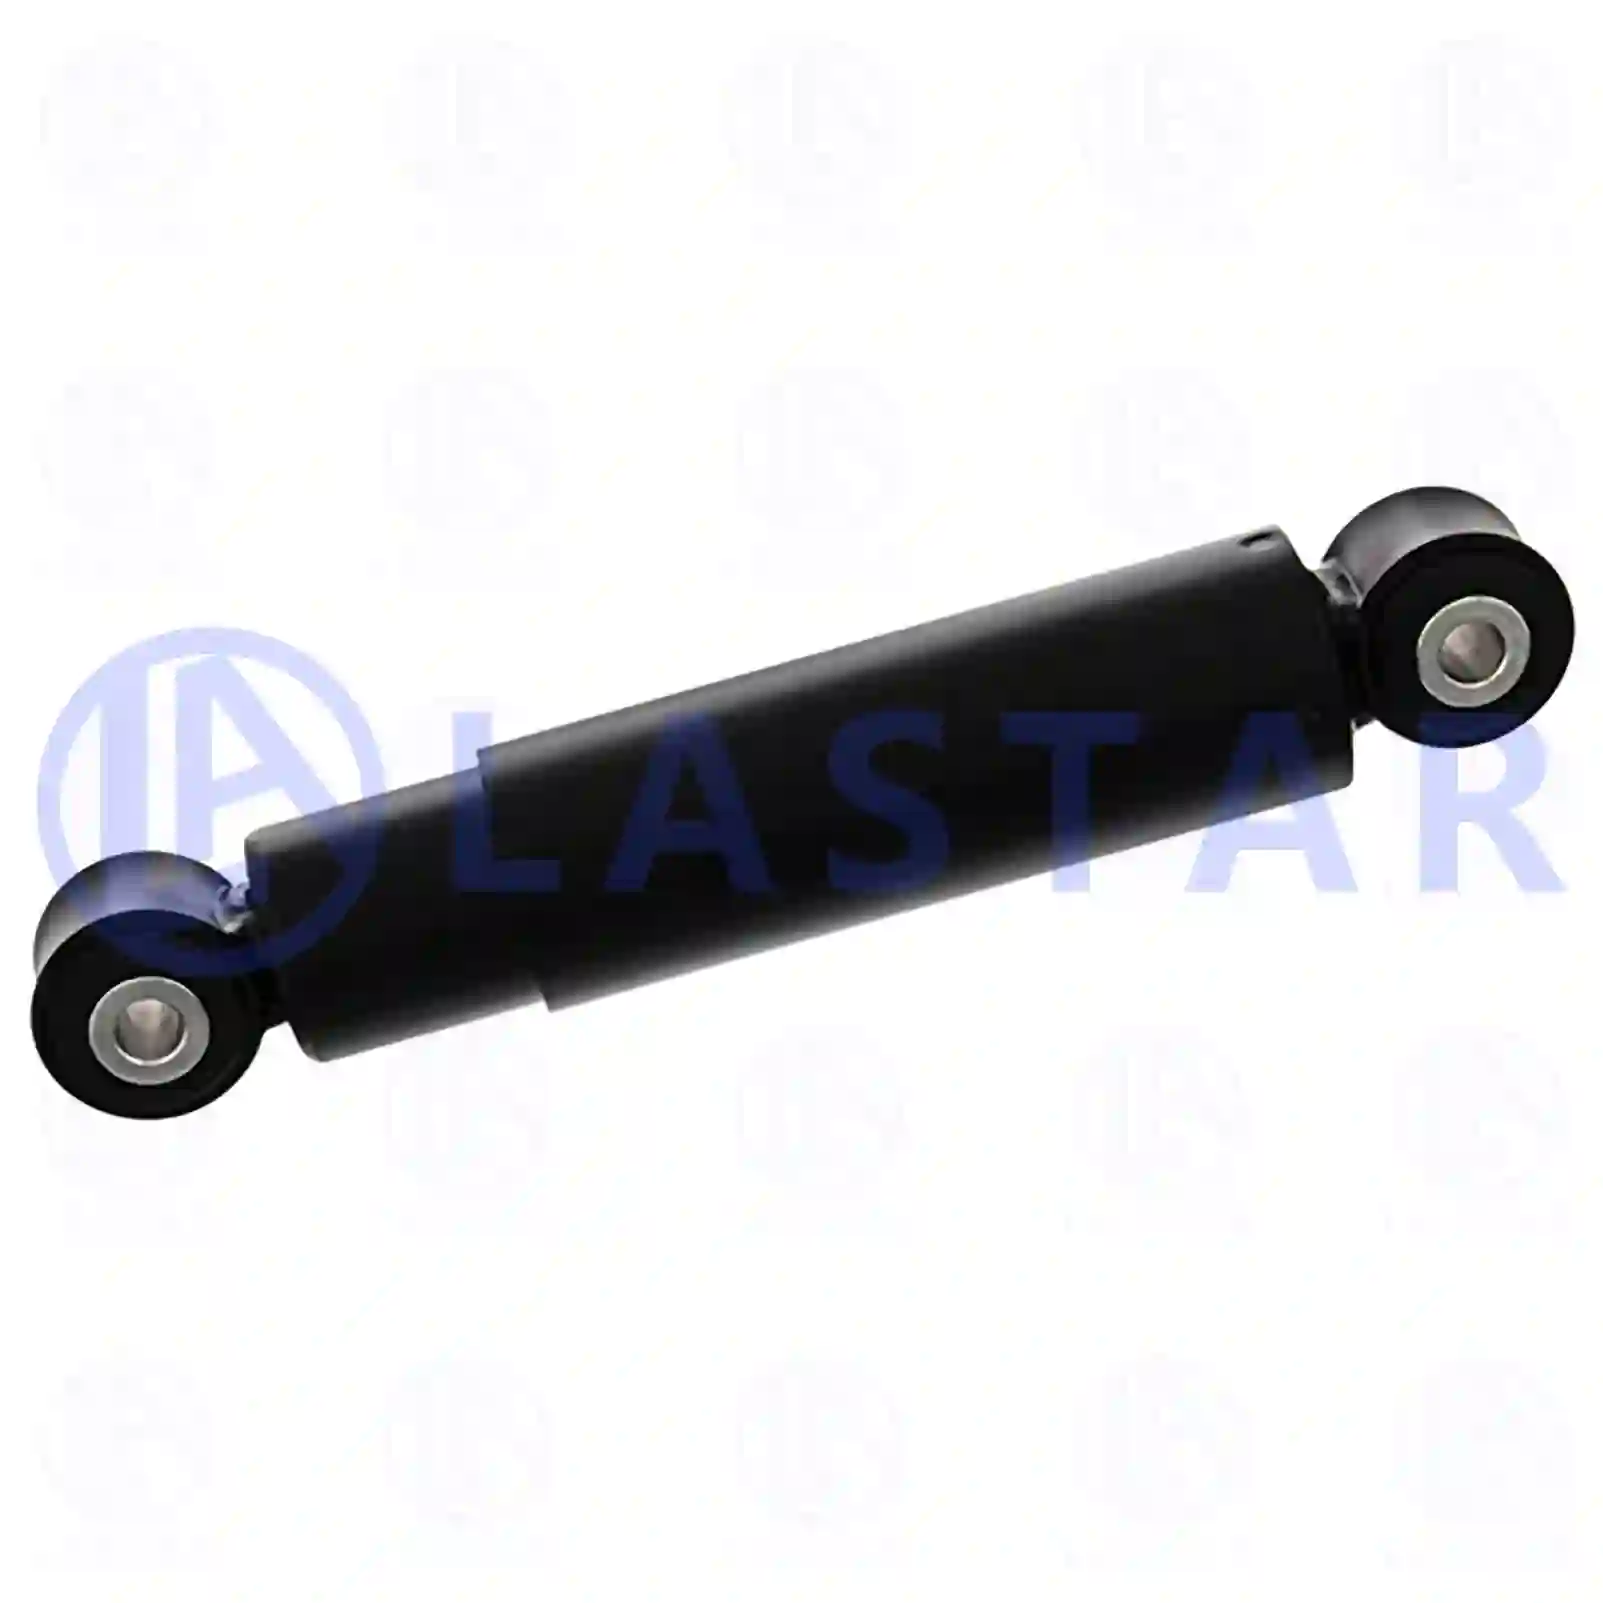 Shock absorber, 77727081, 41006921, 41218440, 41296756, 99474646, 33139100, ||  77727081 Lastar Spare Part | Truck Spare Parts, Auotomotive Spare Parts Shock absorber, 77727081, 41006921, 41218440, 41296756, 99474646, 33139100, ||  77727081 Lastar Spare Part | Truck Spare Parts, Auotomotive Spare Parts